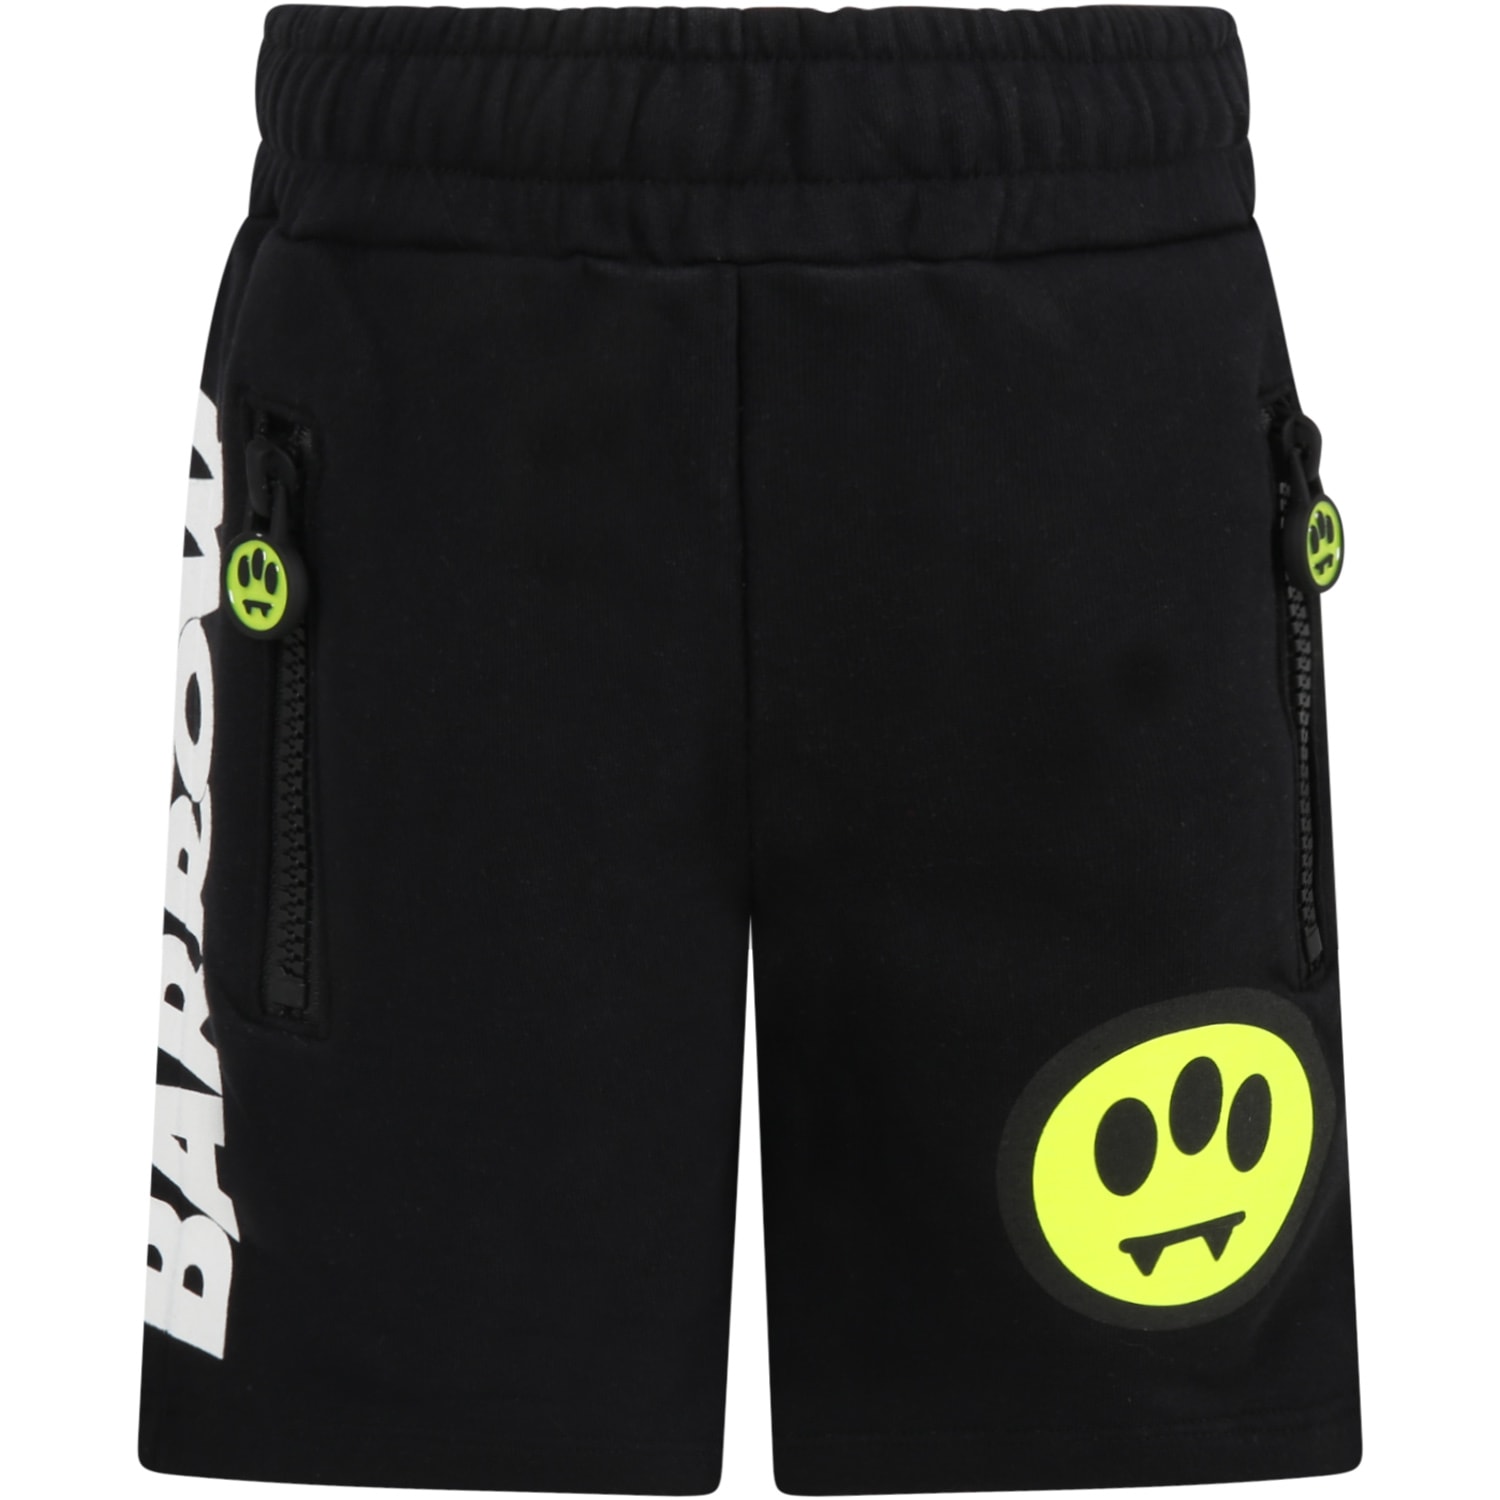 Barrow Black Short For Kids With Smile